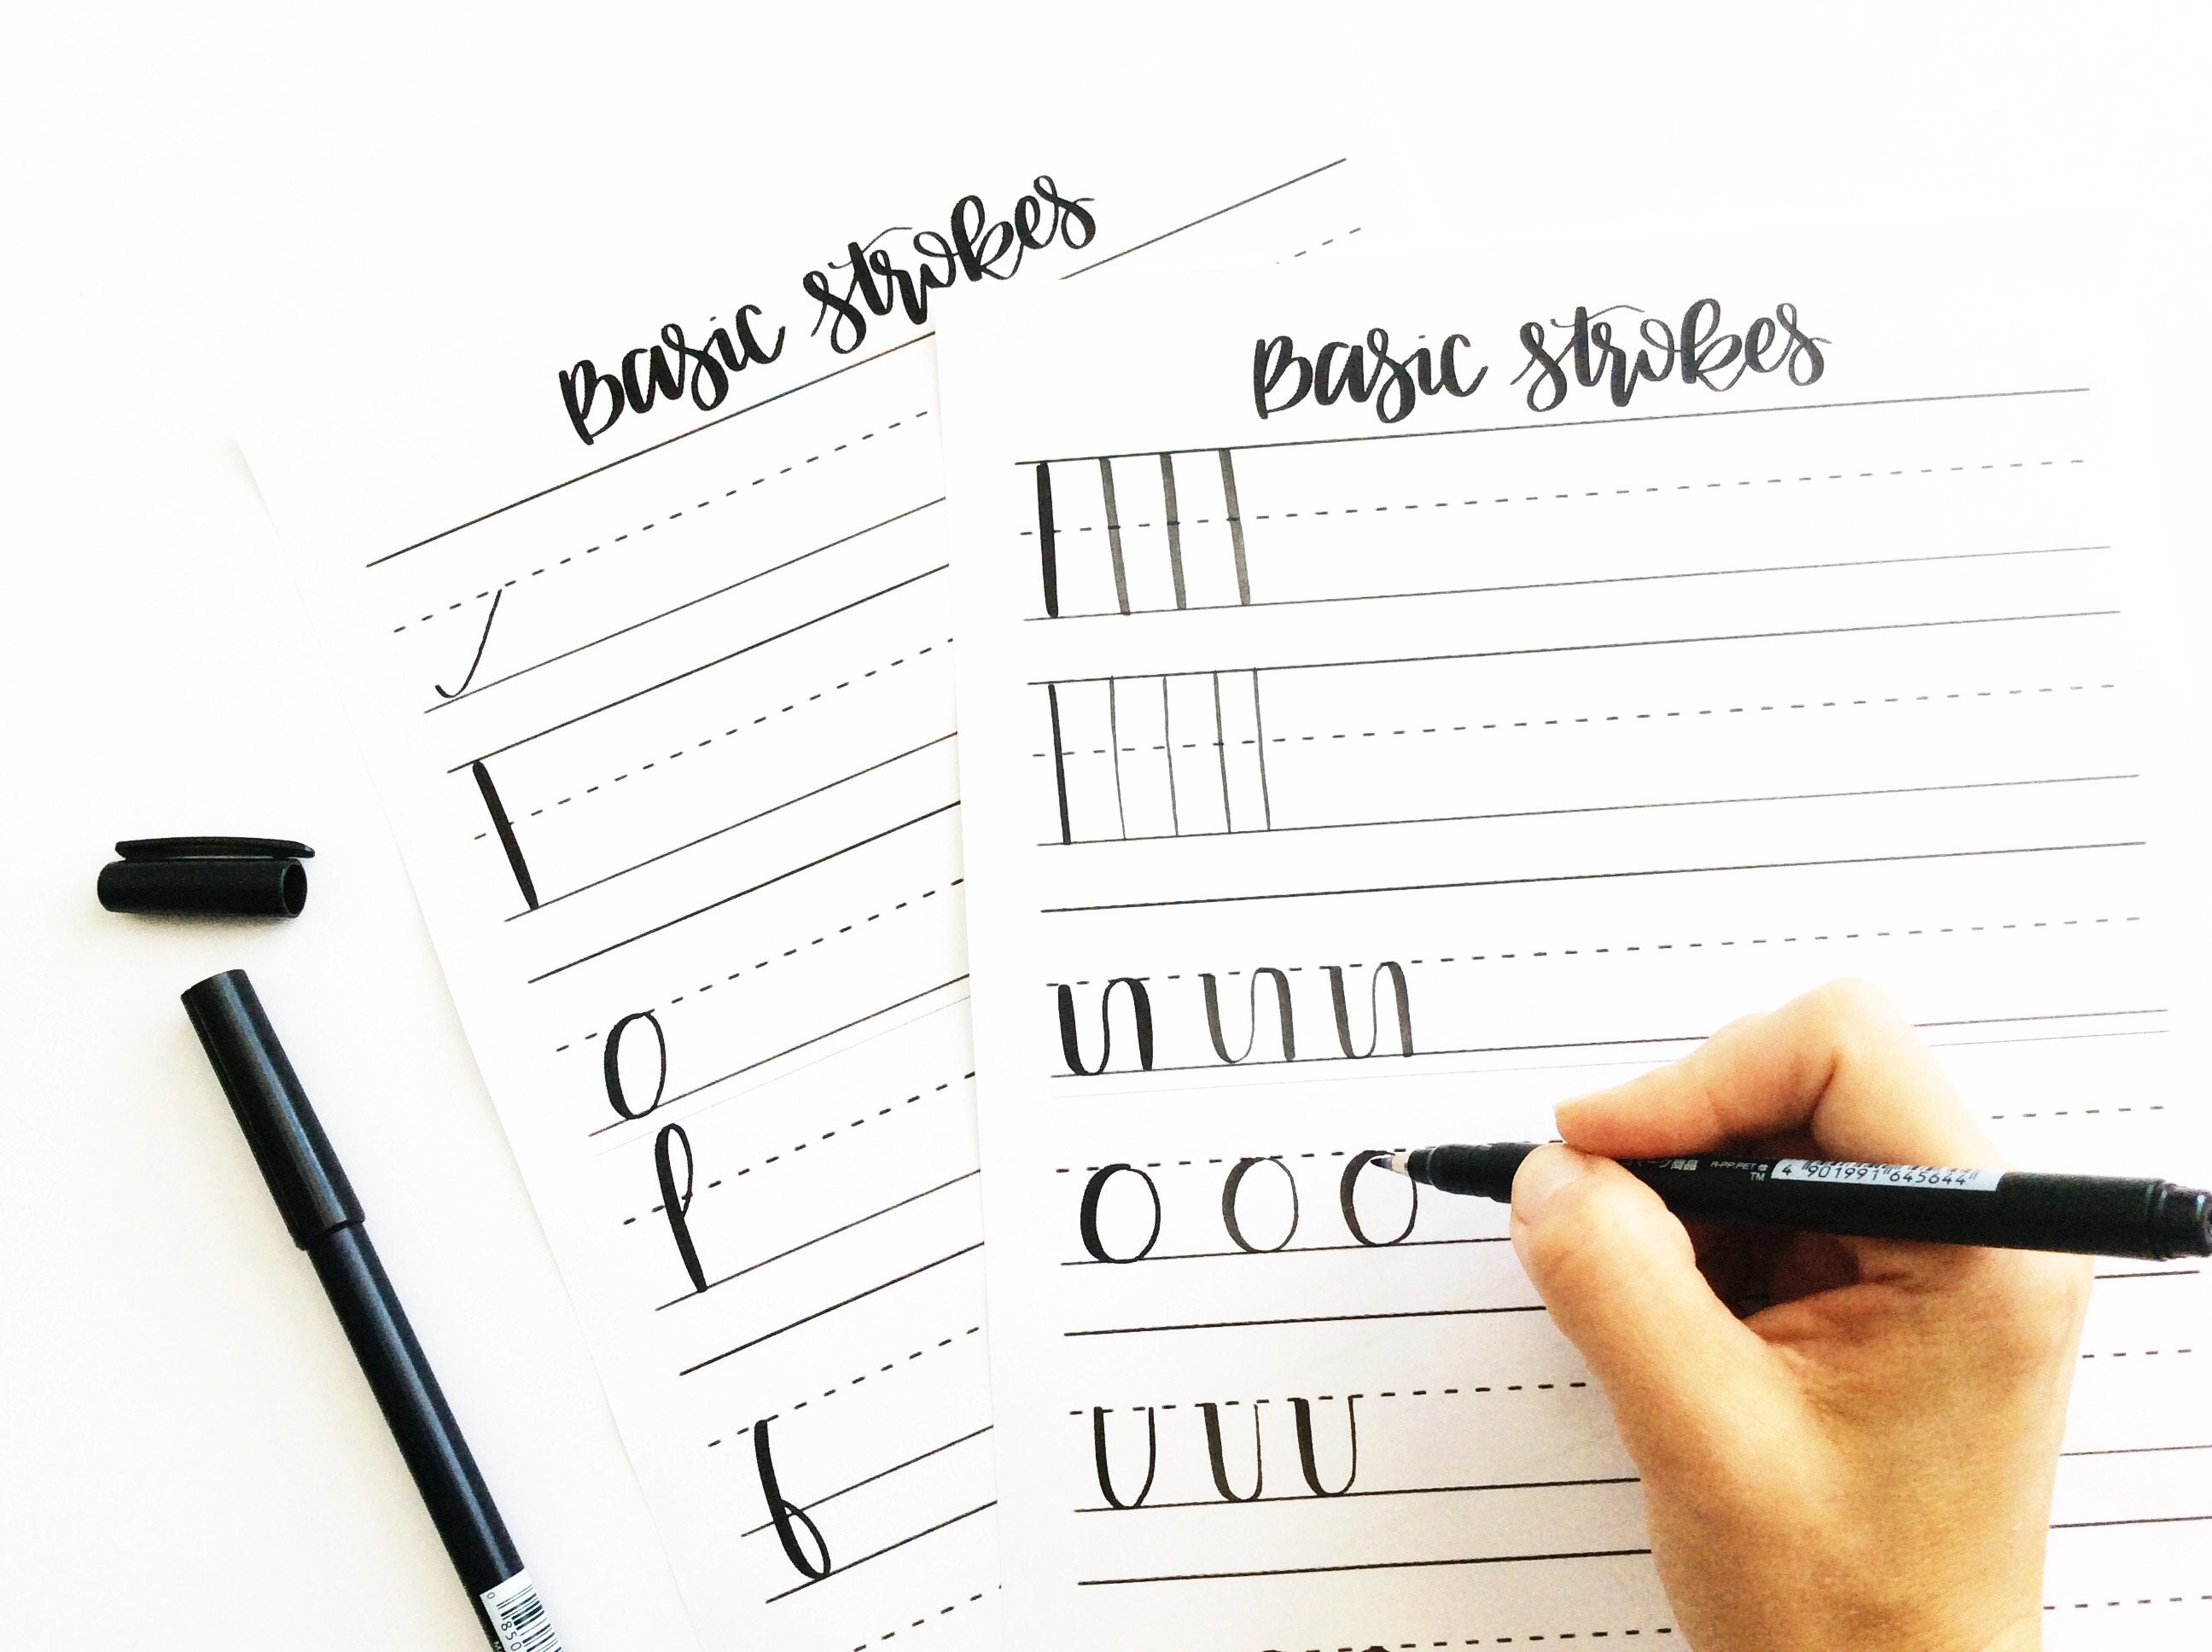 Beginning with Brush Pens Online Course – Hand Lettered Design